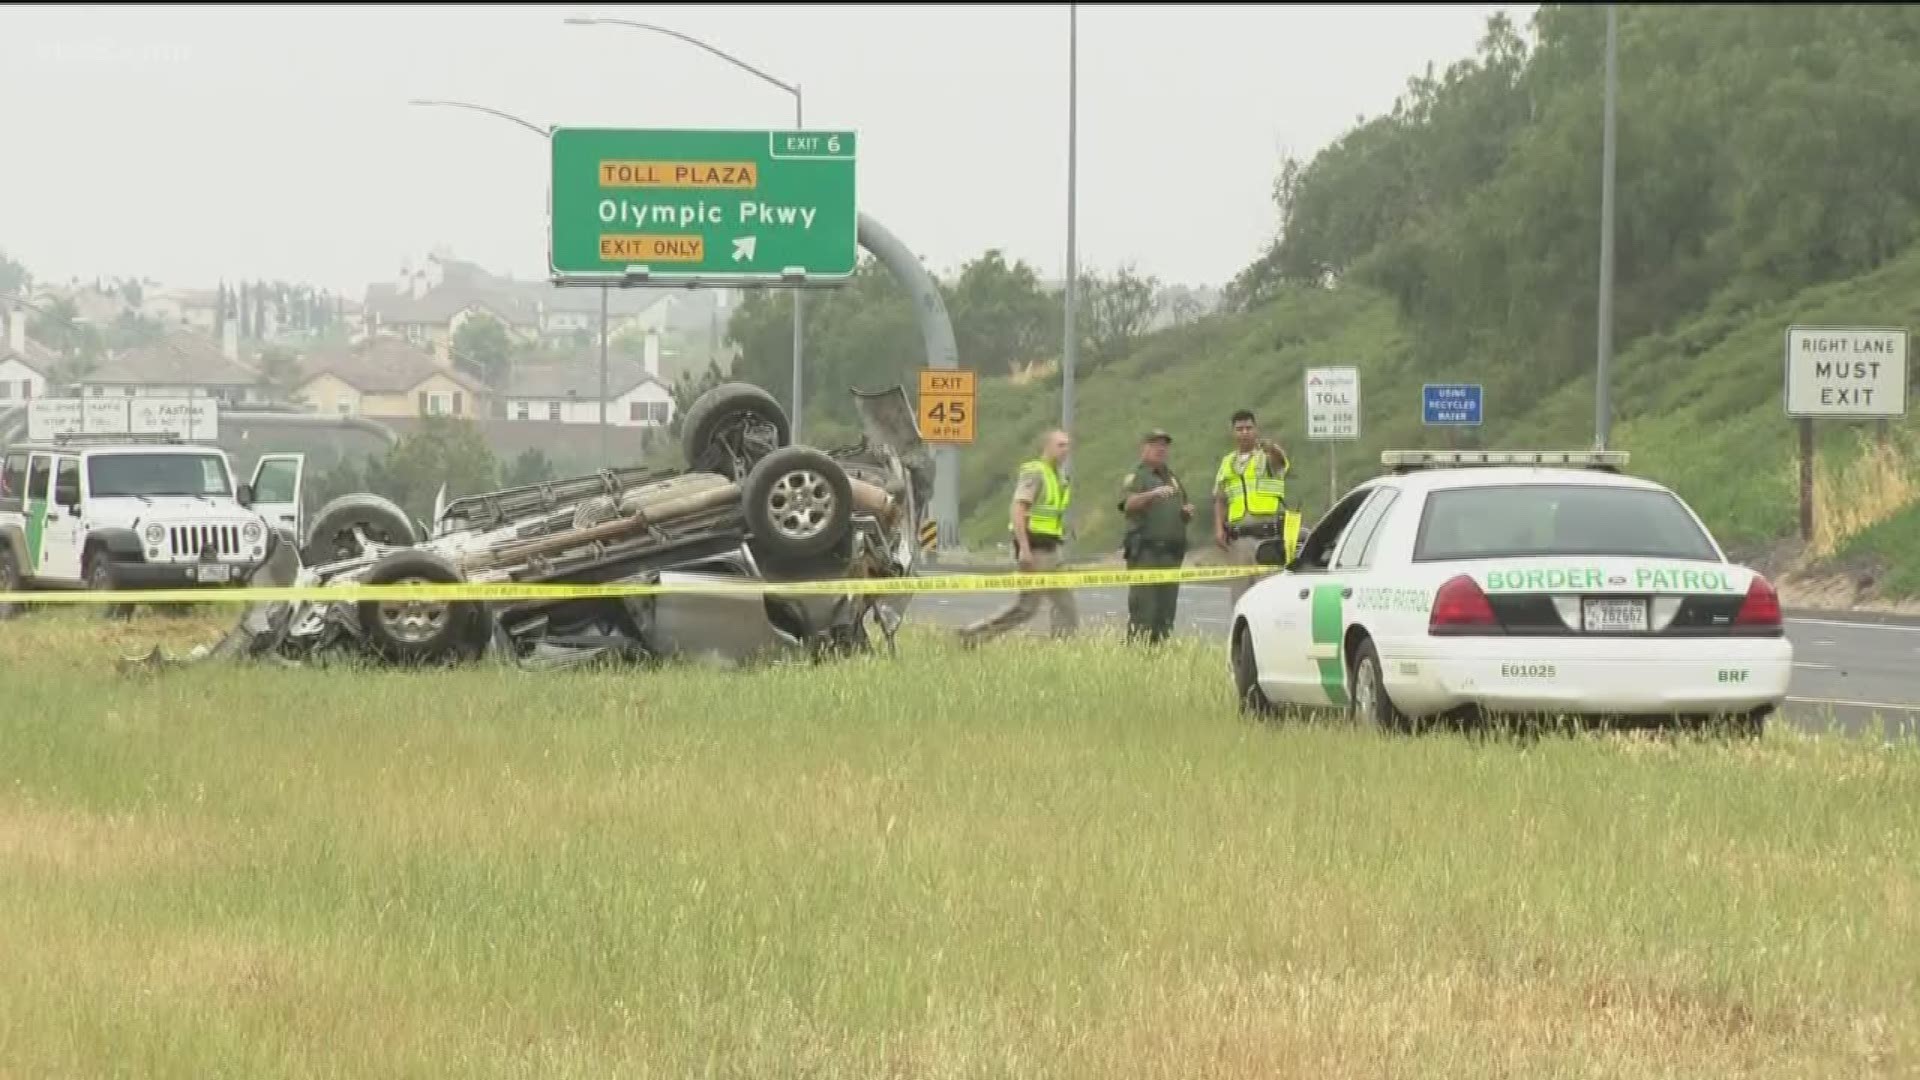 The SUV driver fled and Border Patrol agents attempted to stop the vehicle, but the driver continued north onto state Route 125